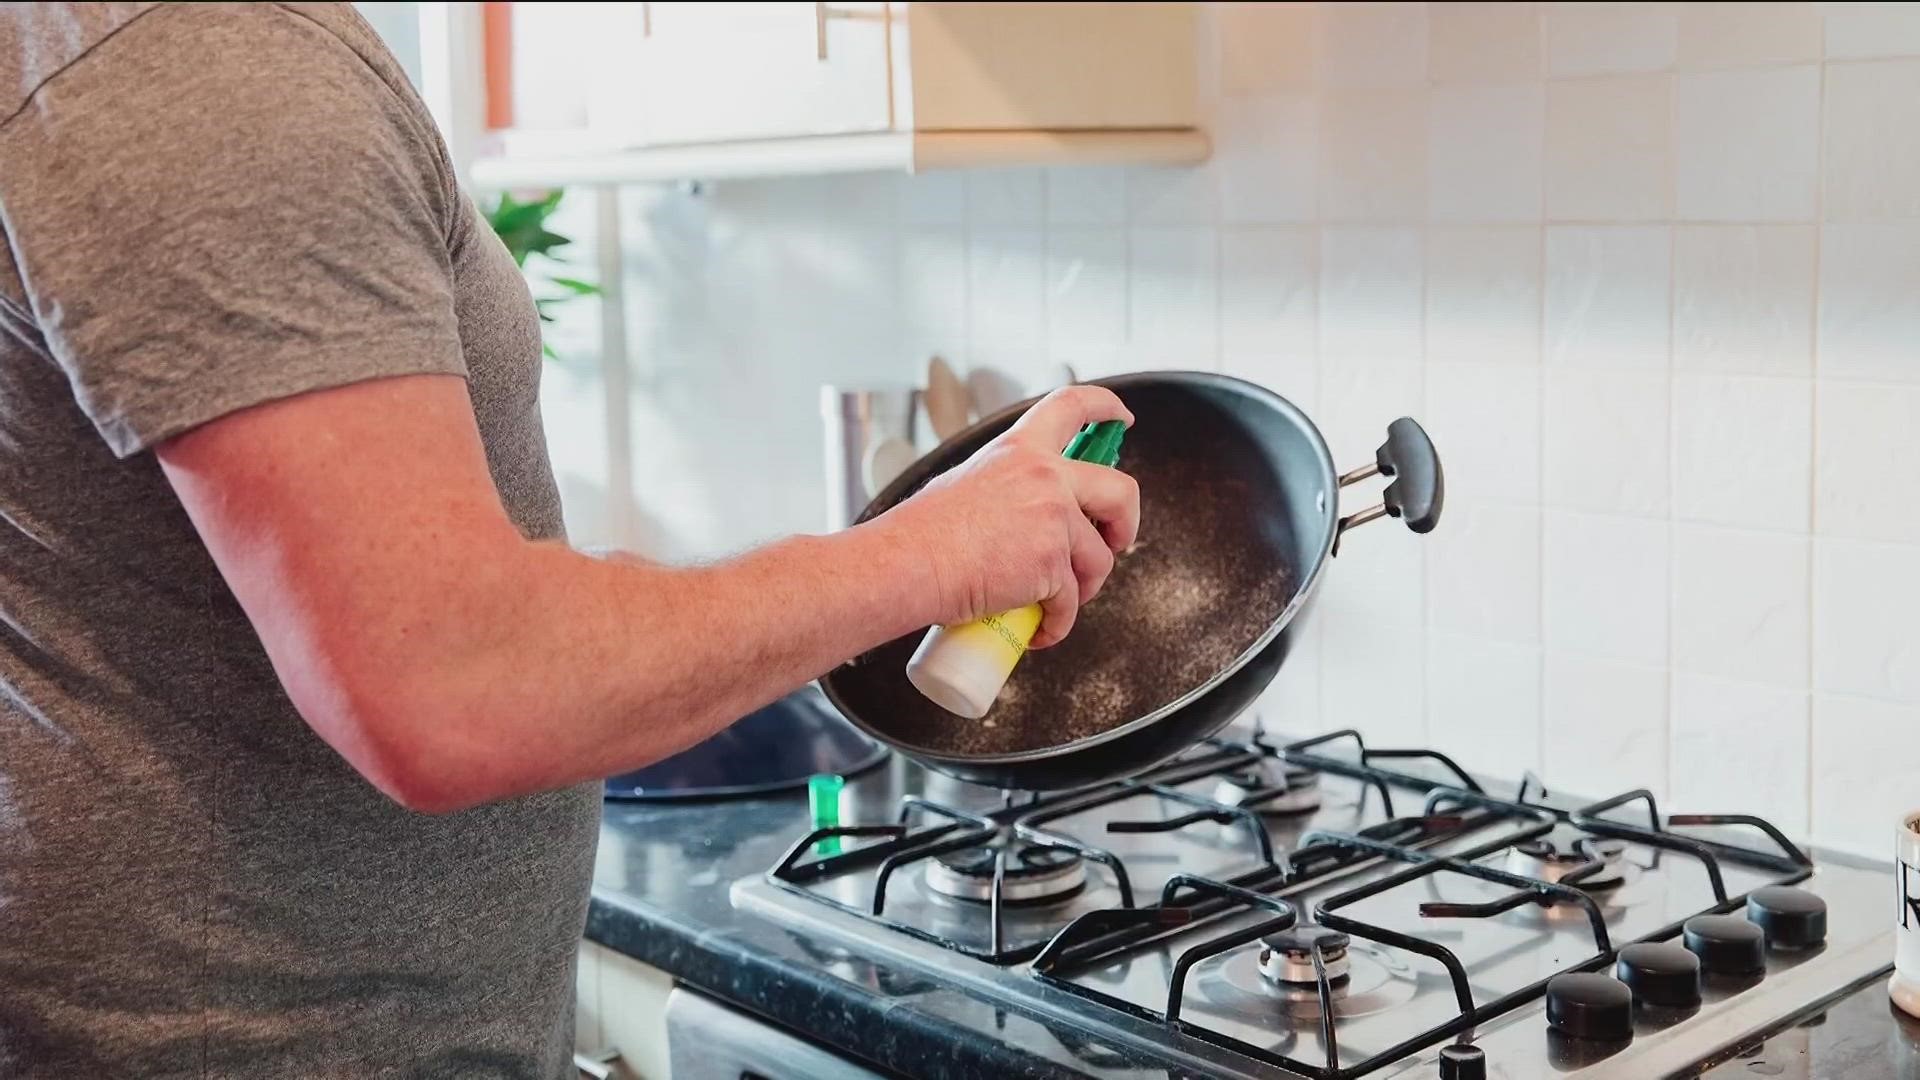 A viral video claimed aerosol cooking sprays are toxic because of the ingredients used in the propellant. One doctor weighed in on the claim.